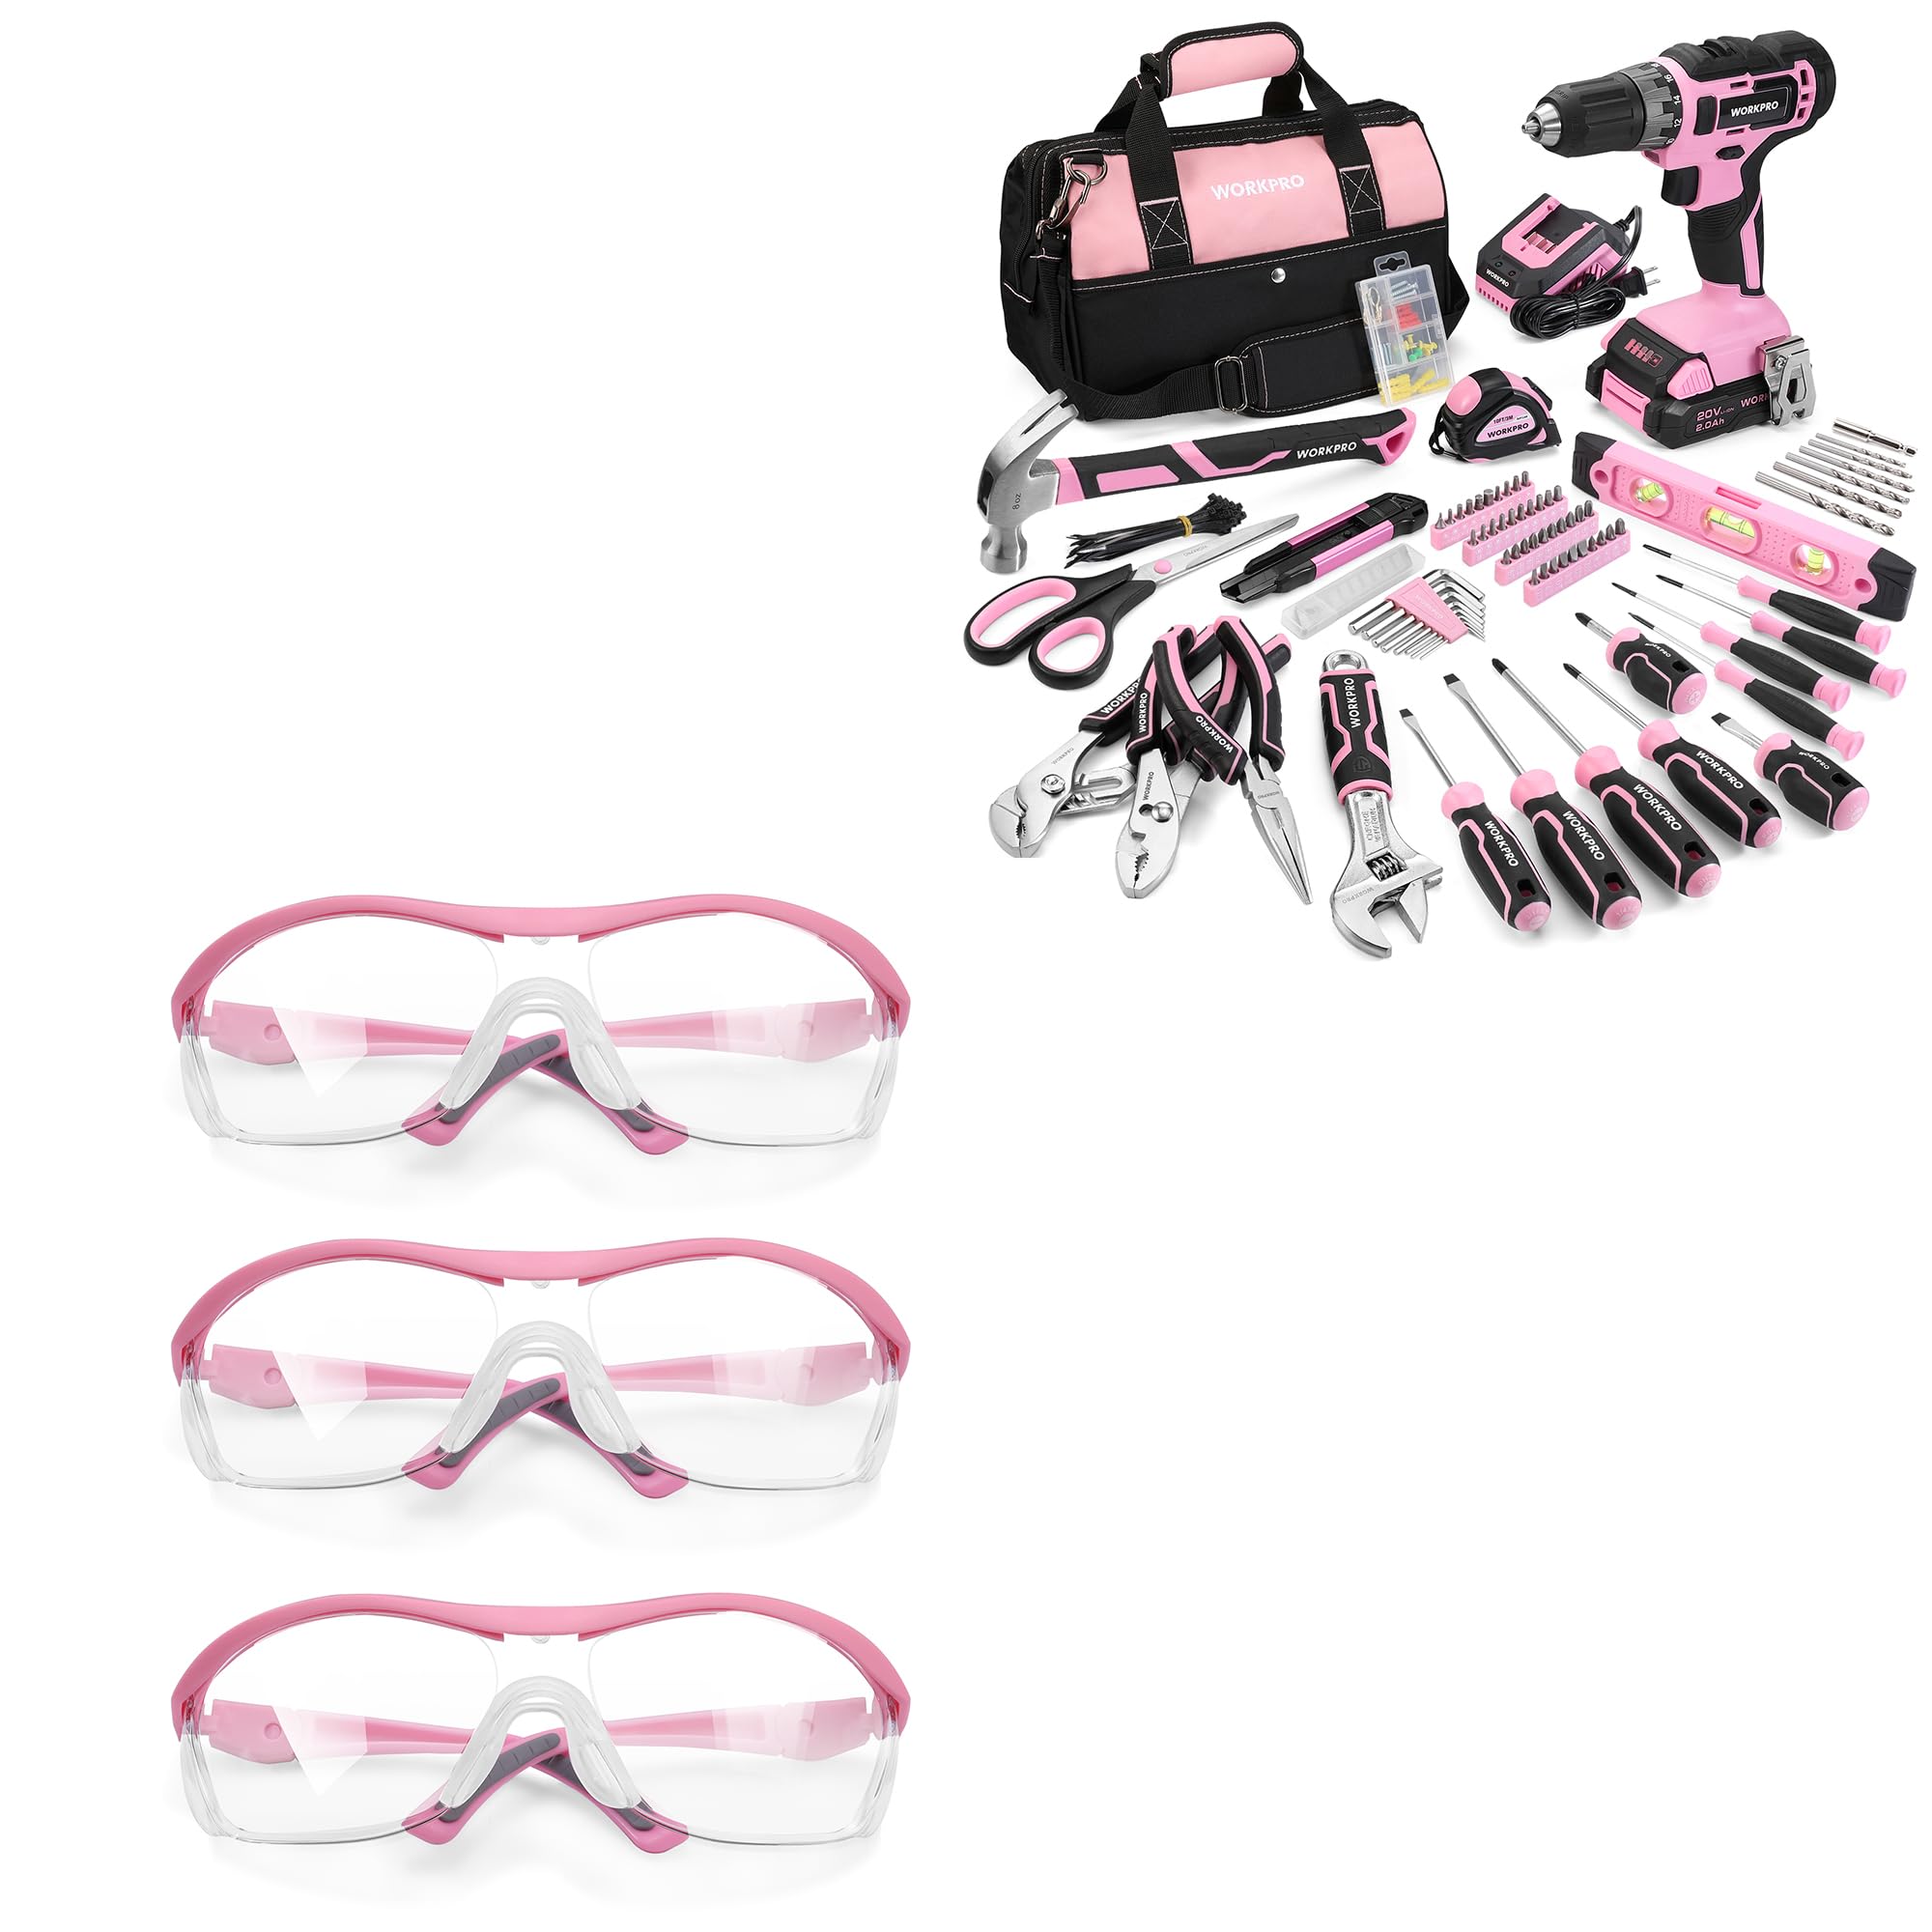 WORKPRO Pink Home Tool Kit with Drill, 3 pack Safety Glasses Z87.1 Anti Fog UV Protection Safety Goggles Ideal for Carpentry Construction Lab Travel Dental